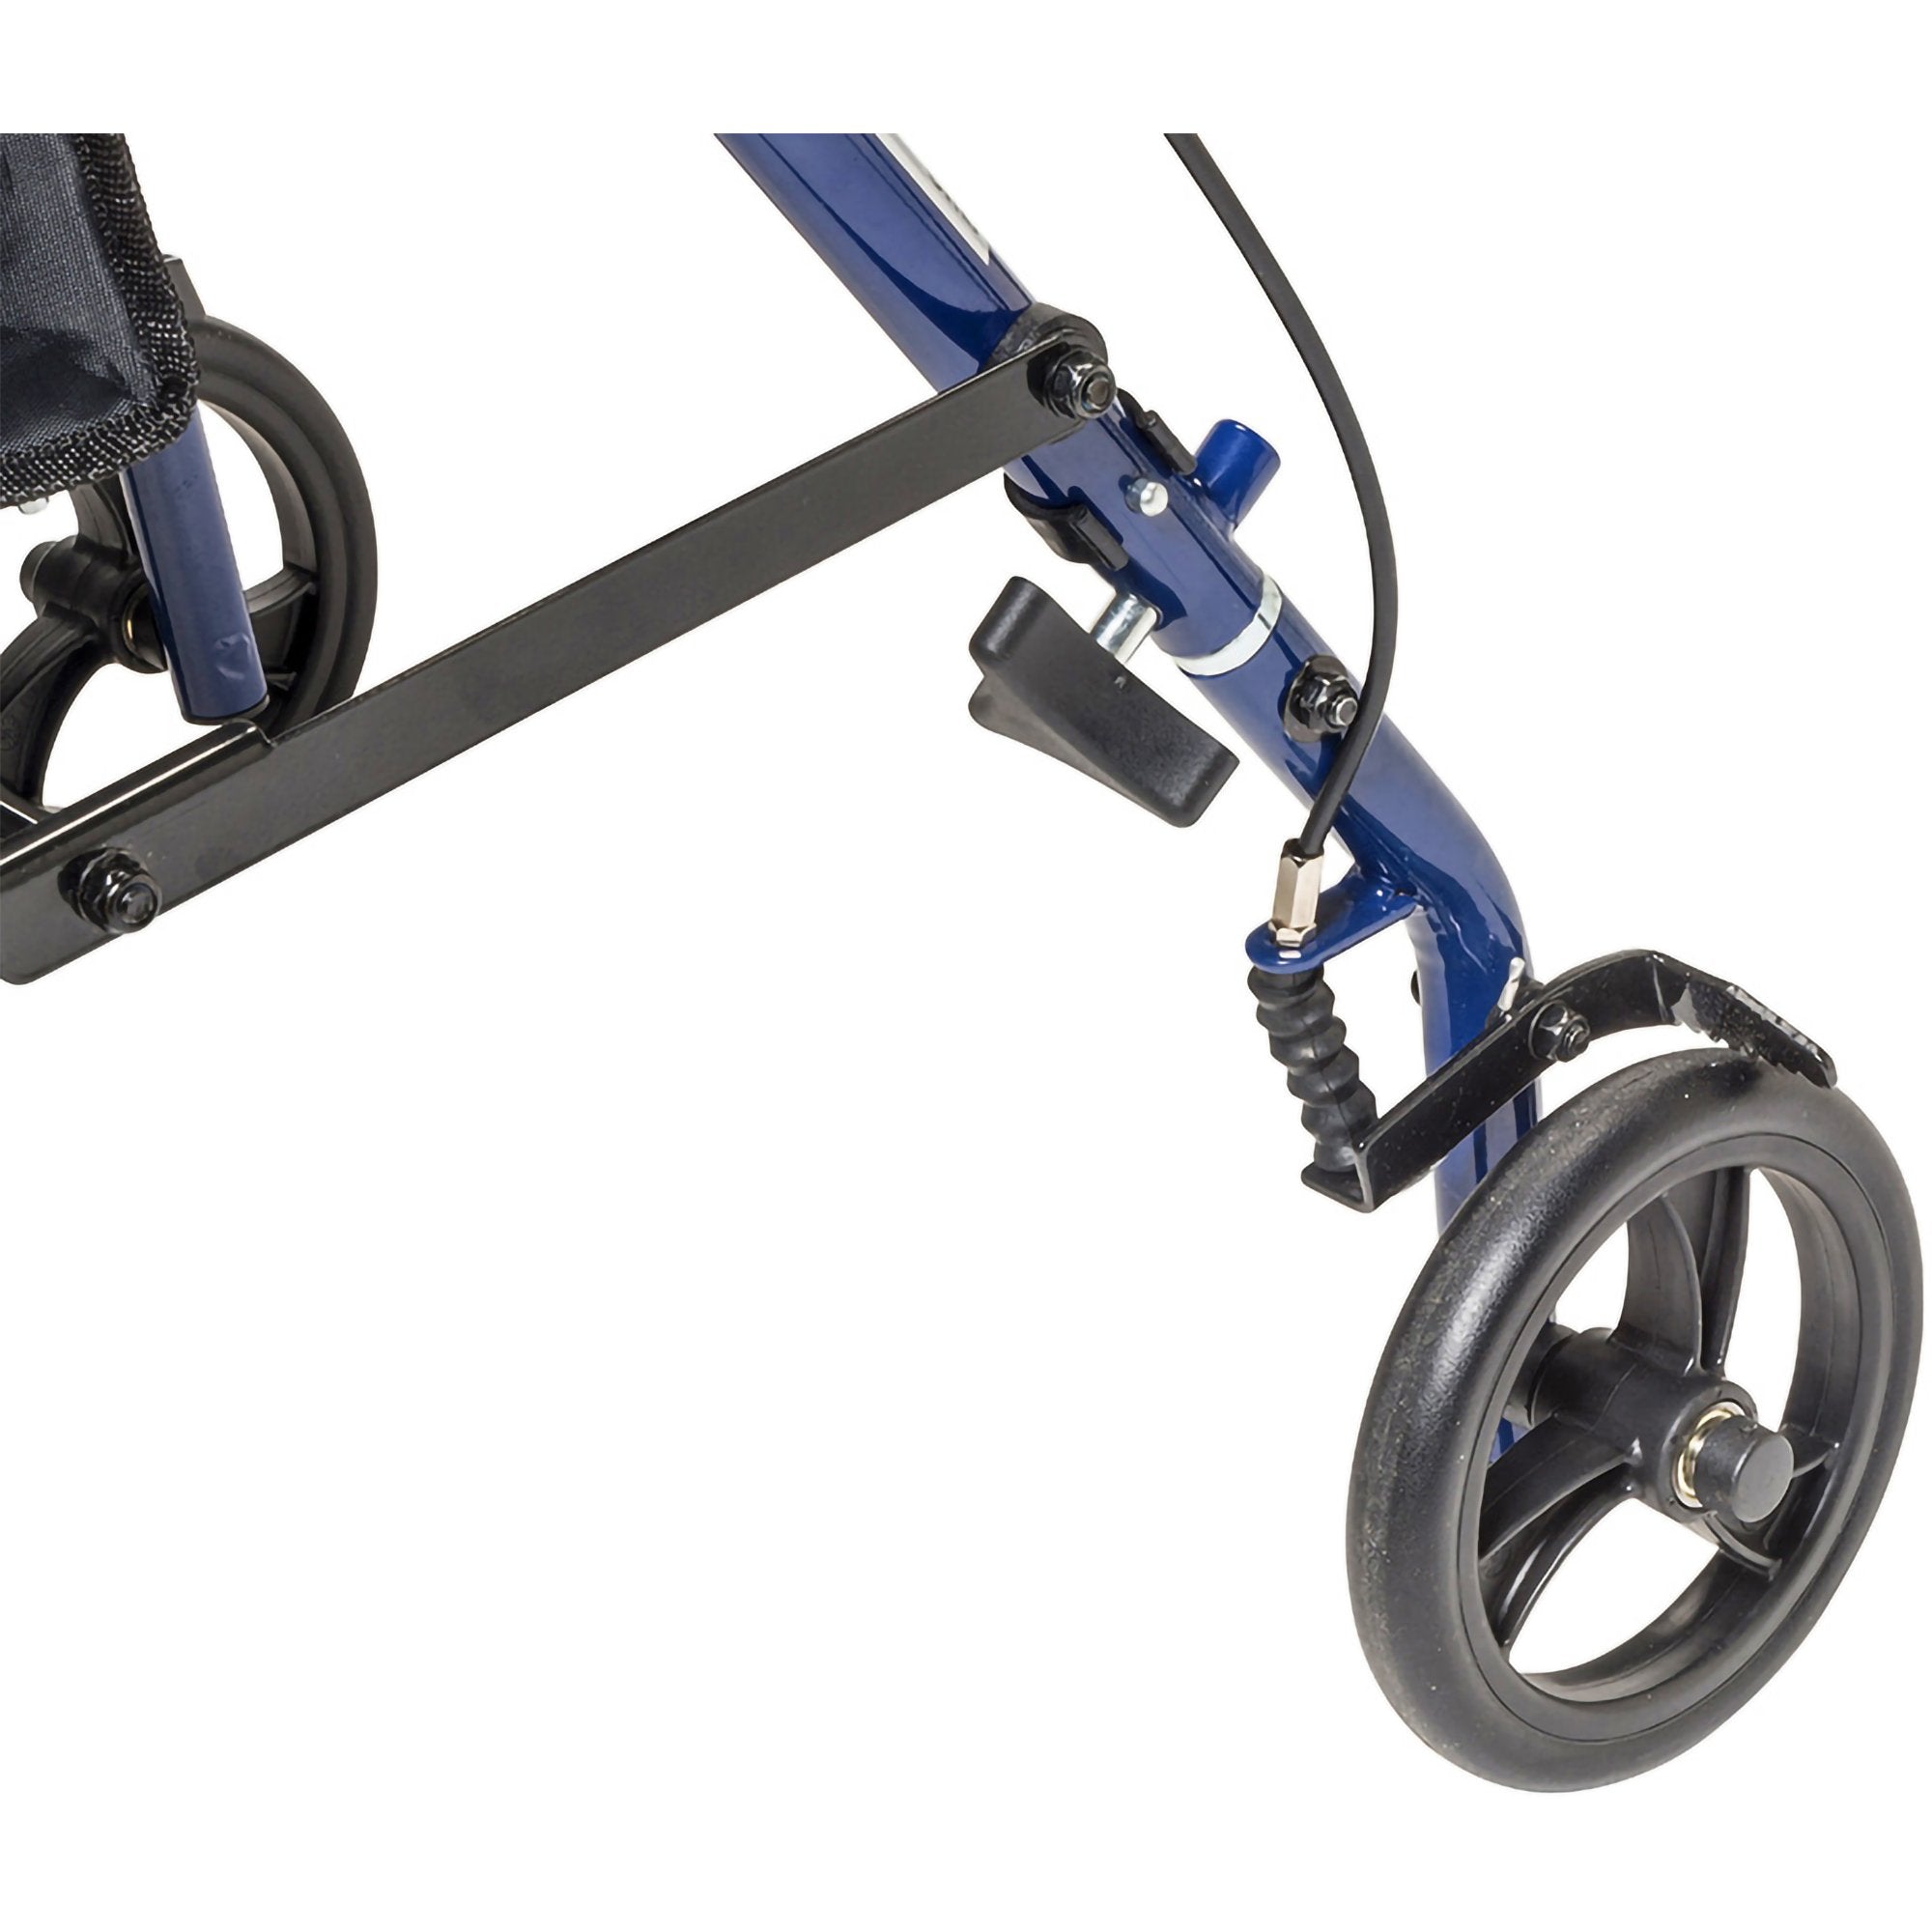 drive™ Steel Rollator with 6 Inch Wheels, Blue (1 Unit)